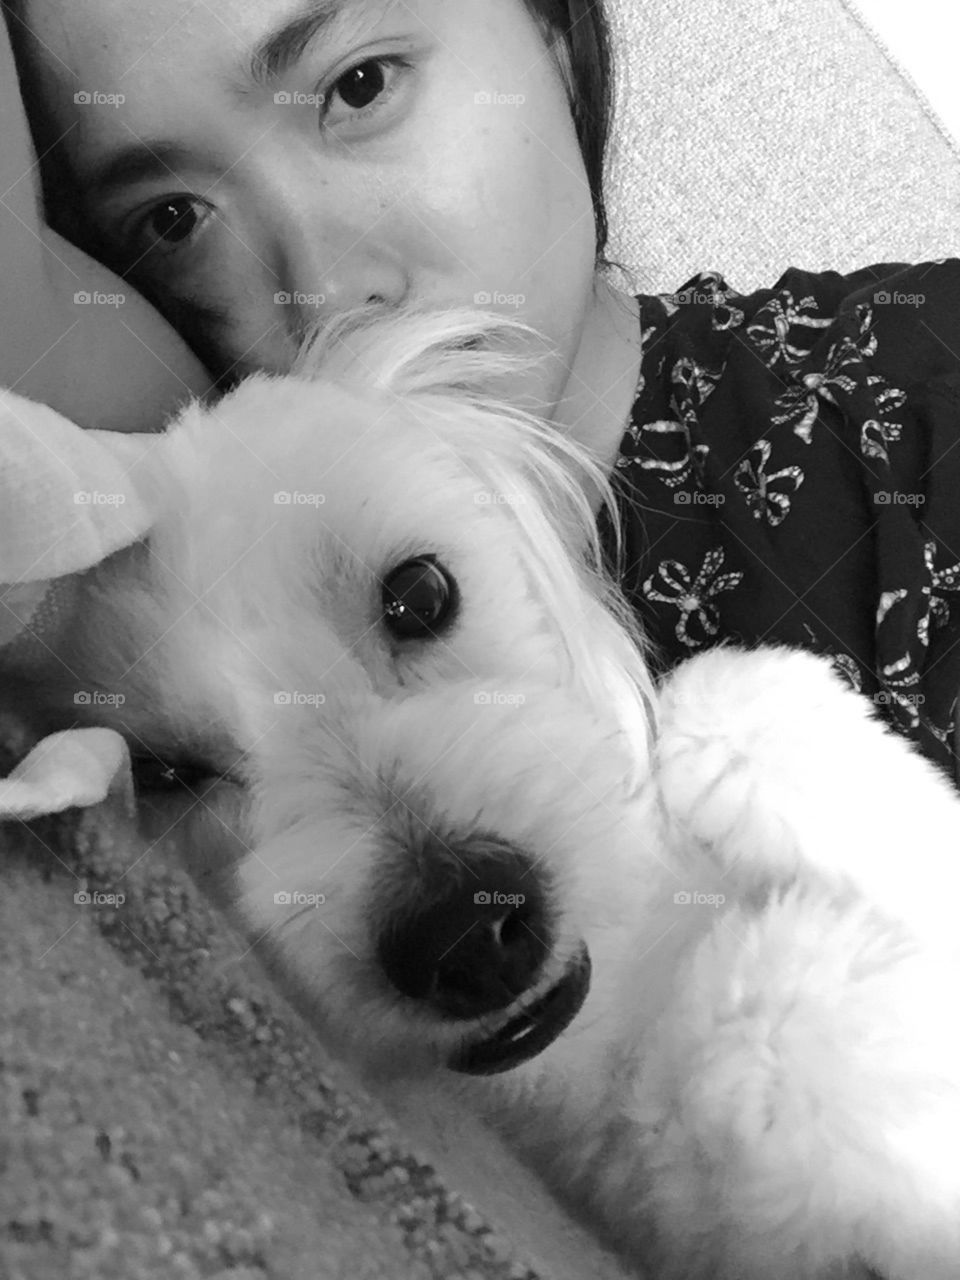 Snugly Leo . This is me and my pup . His name is Leo . He is a Coton de tulear . 
